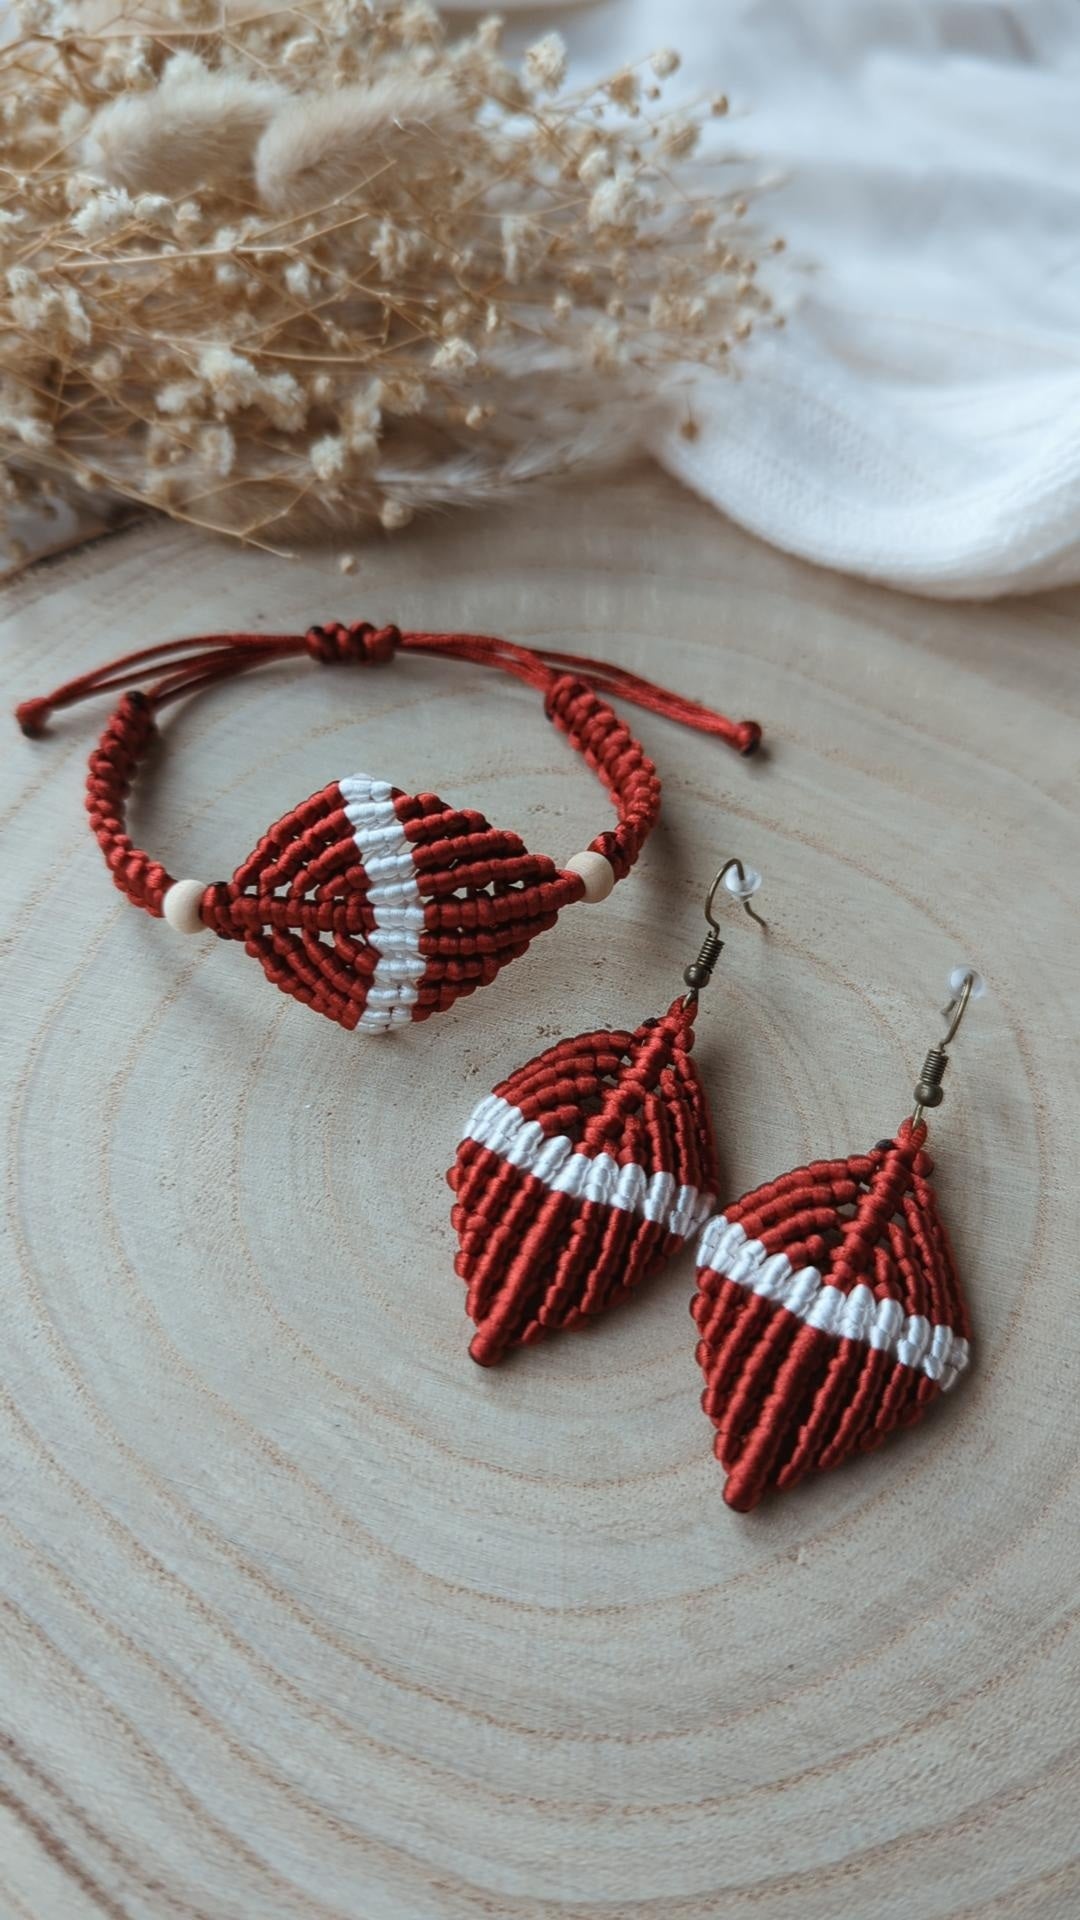 Do You Have The Pattern for This Micro-Macrame Bracelet?